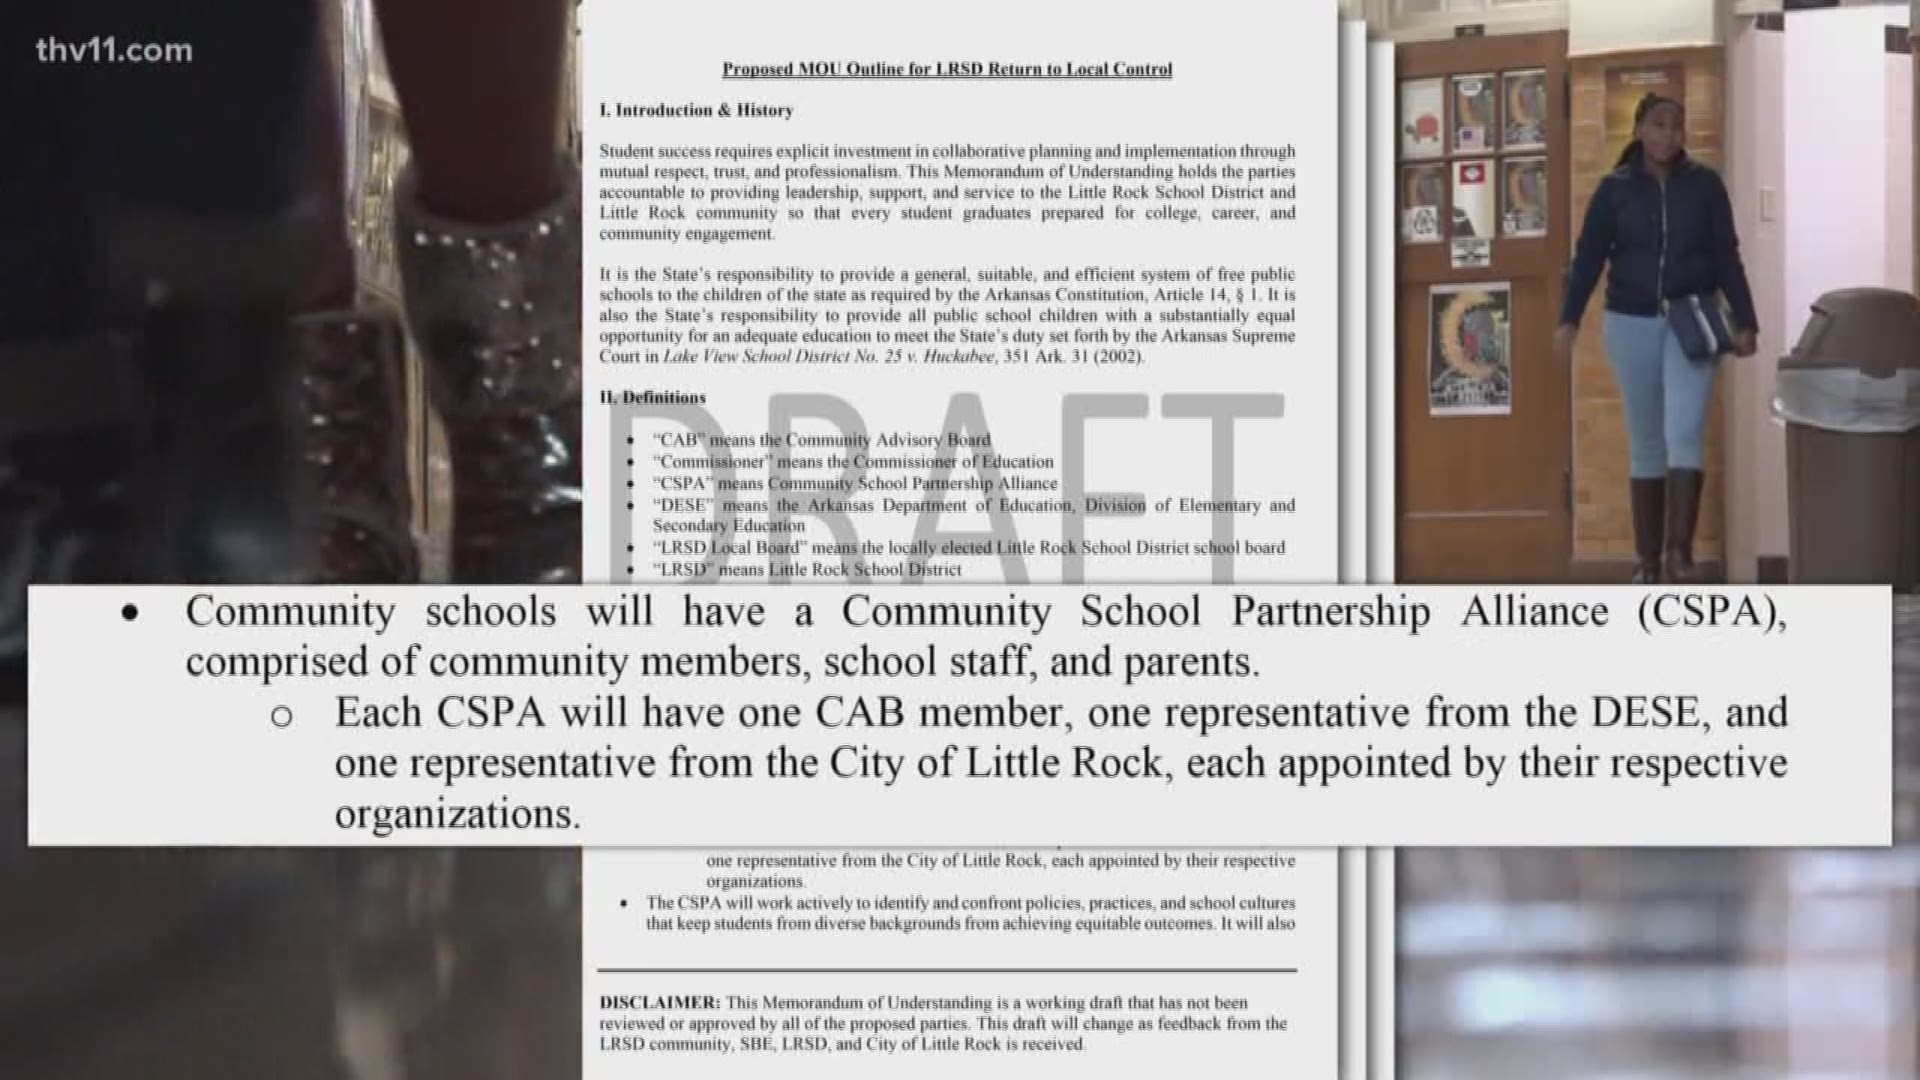 Education Secretary Johnny Key released a draft memorandum of understanding Tuesday which looks to shift the power of the LRSD.